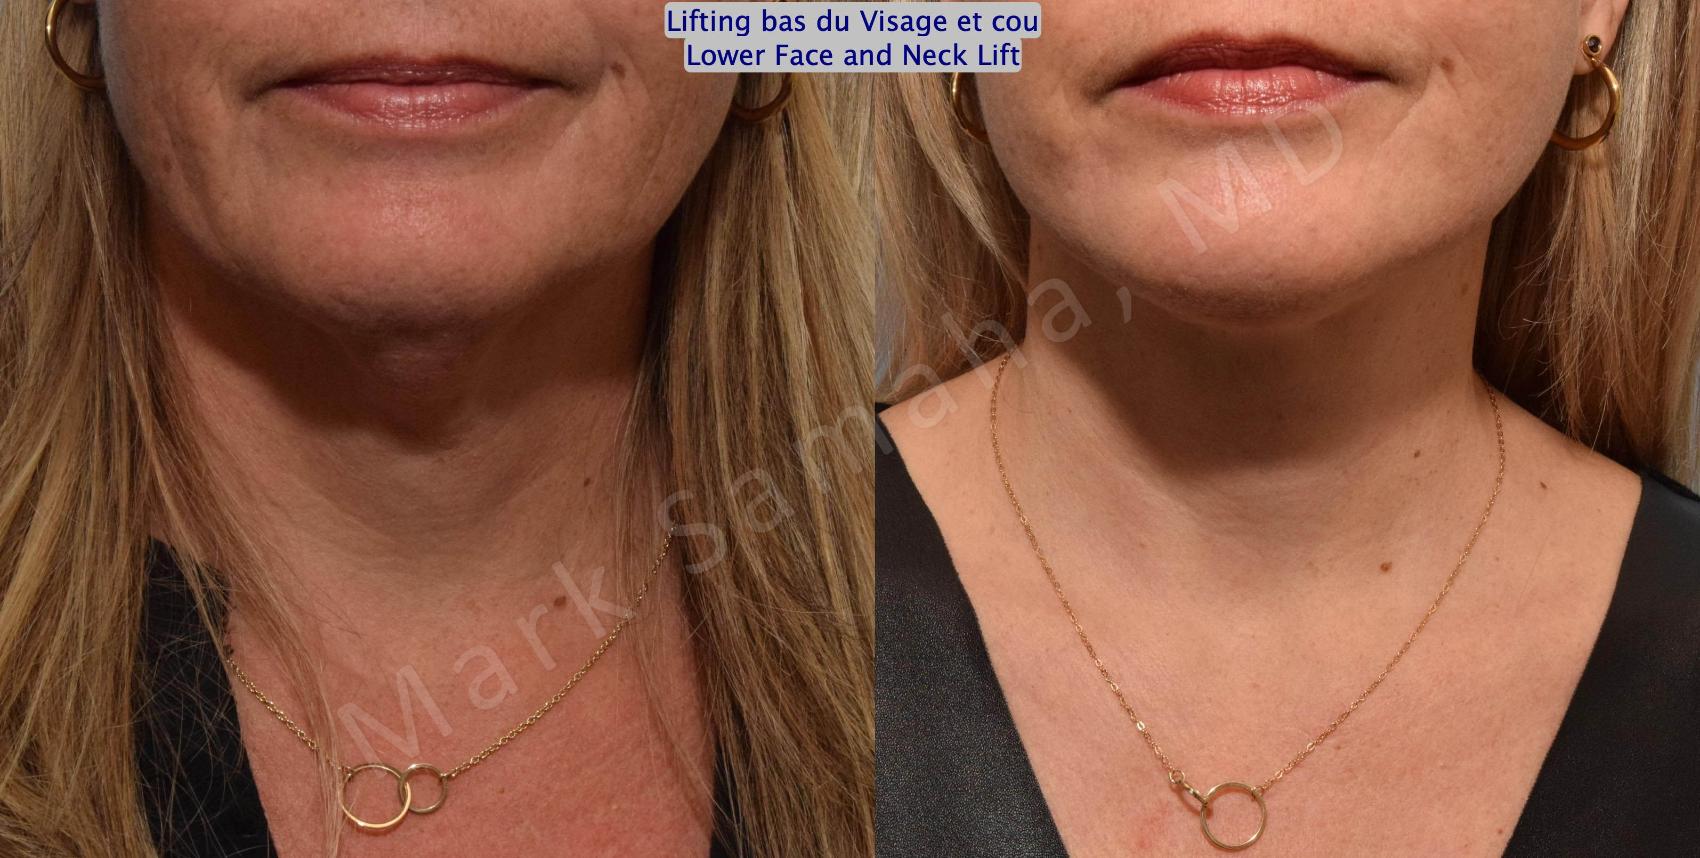 Before & After Lifting du visage / Cou - Facelift / Necklift Case 160 Frontal Neck Cou View in Montreal, QC